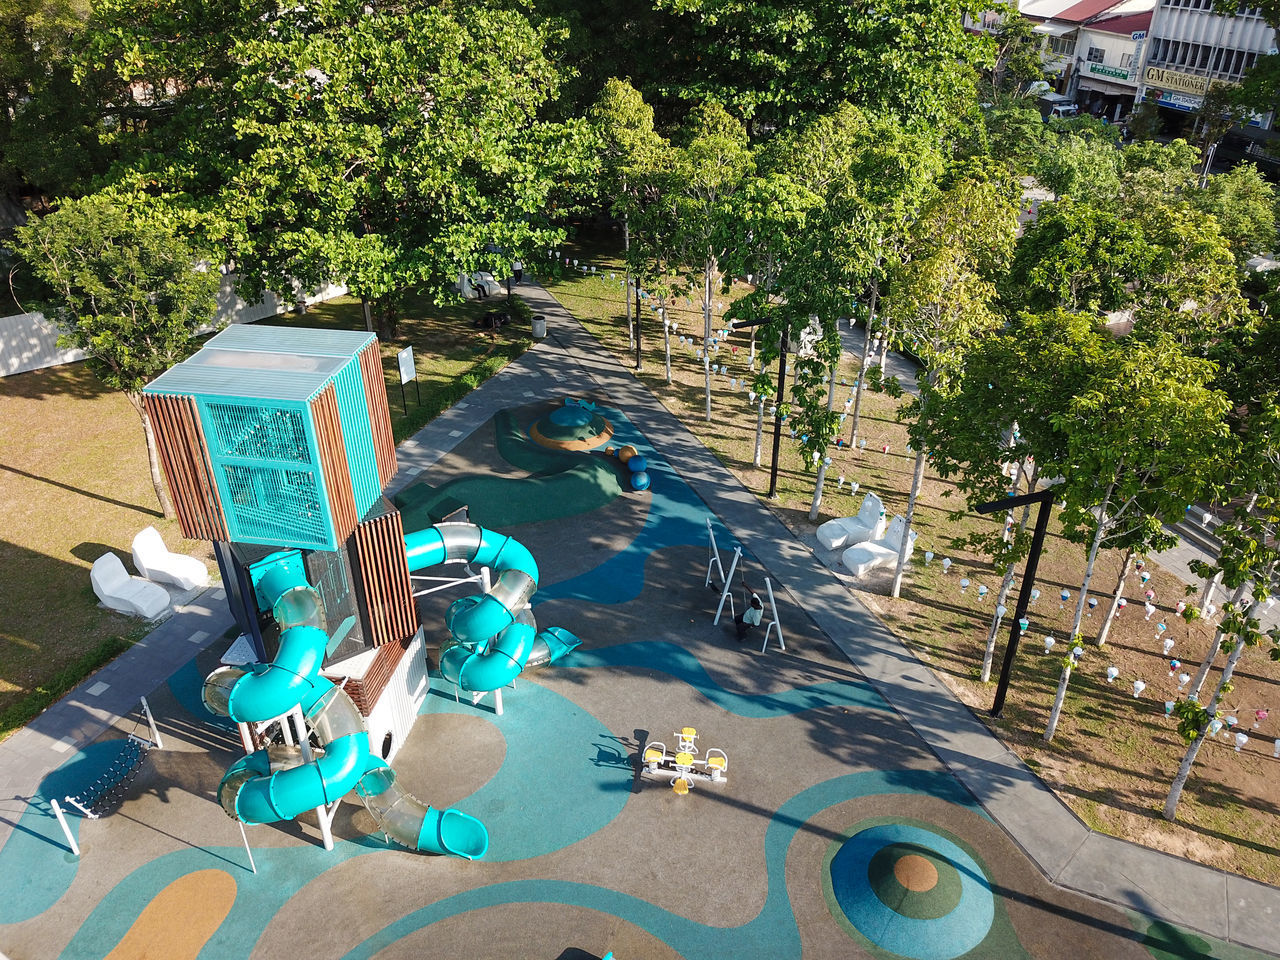 HIGH ANGLE VIEW OF SWIMMING POOL AT PARK IN CITY